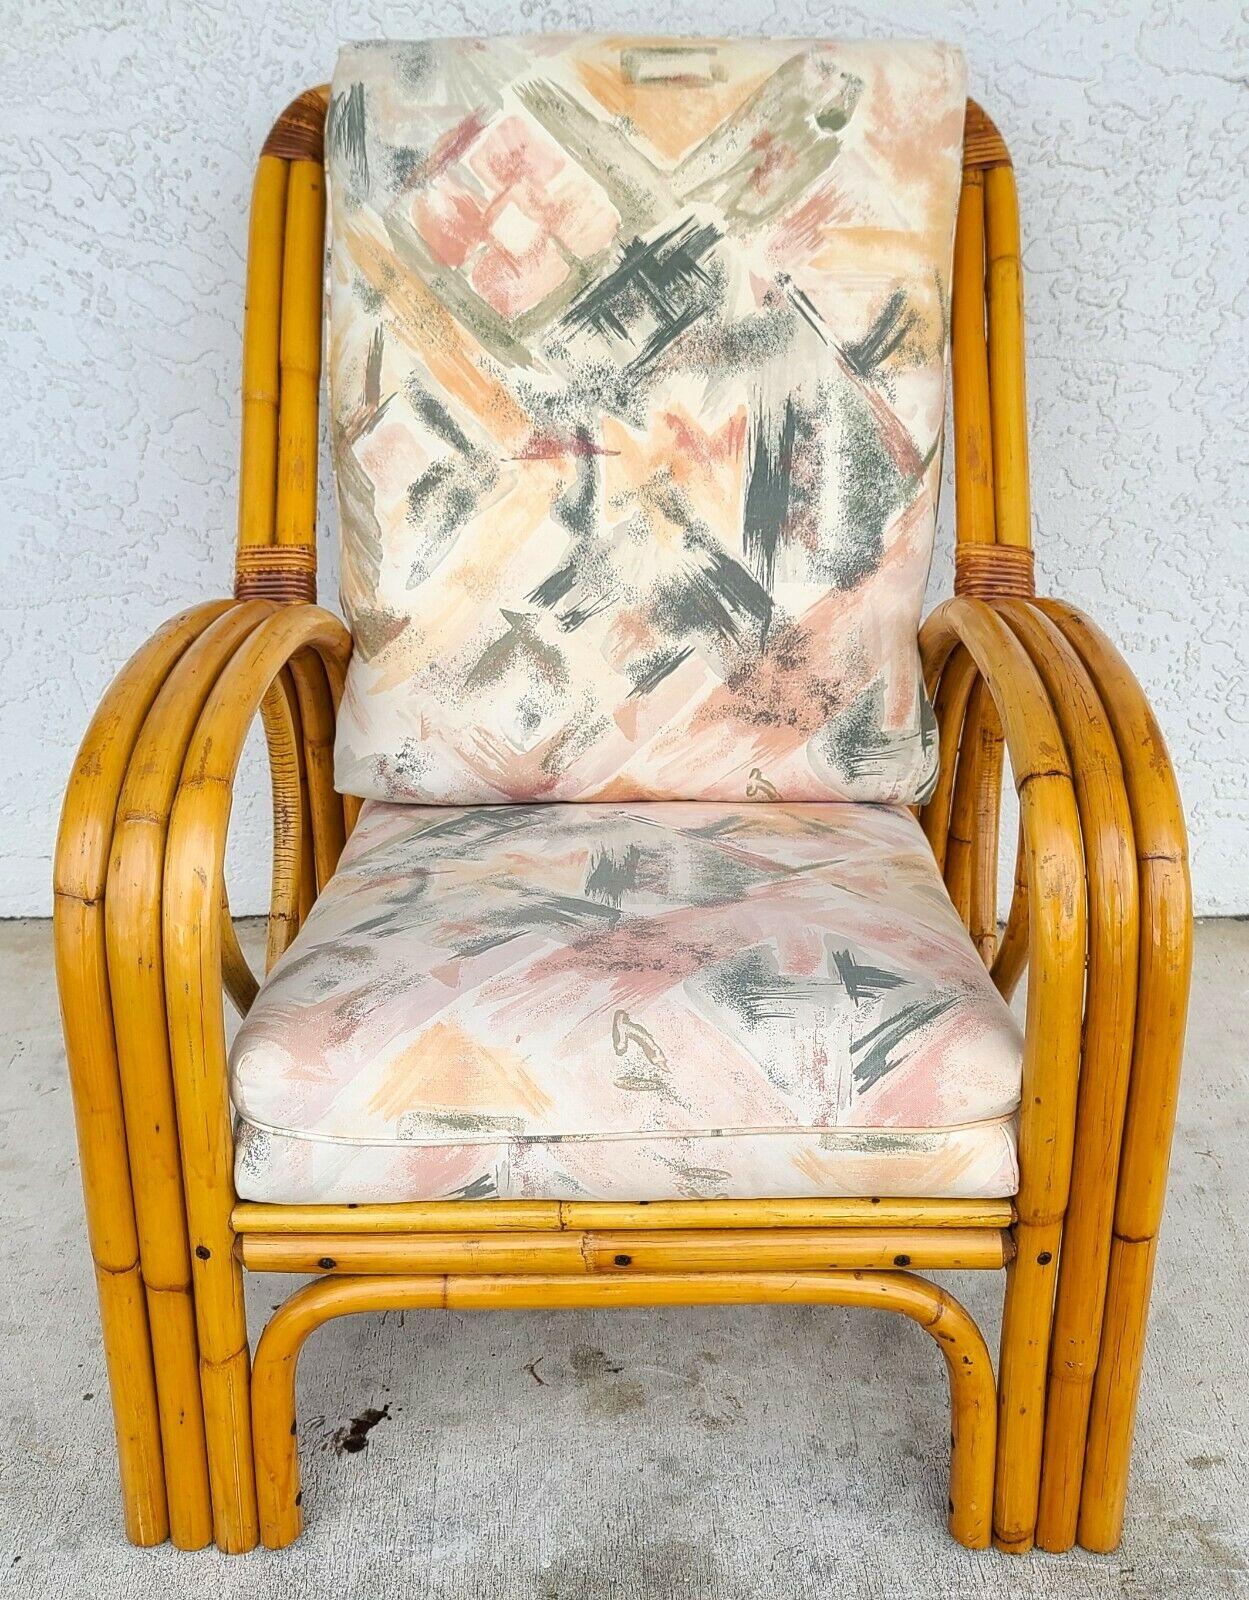 For FULL item description be sure to click on CONTINUE READING at the bottom of this listing.

Offering One Of Our Recent Palm Beach Estate Fine Furniture Acquisitions Of A 1960s Paul Frankl Style Bamboo Armchair by IMPERIAL RATTAN Co

With